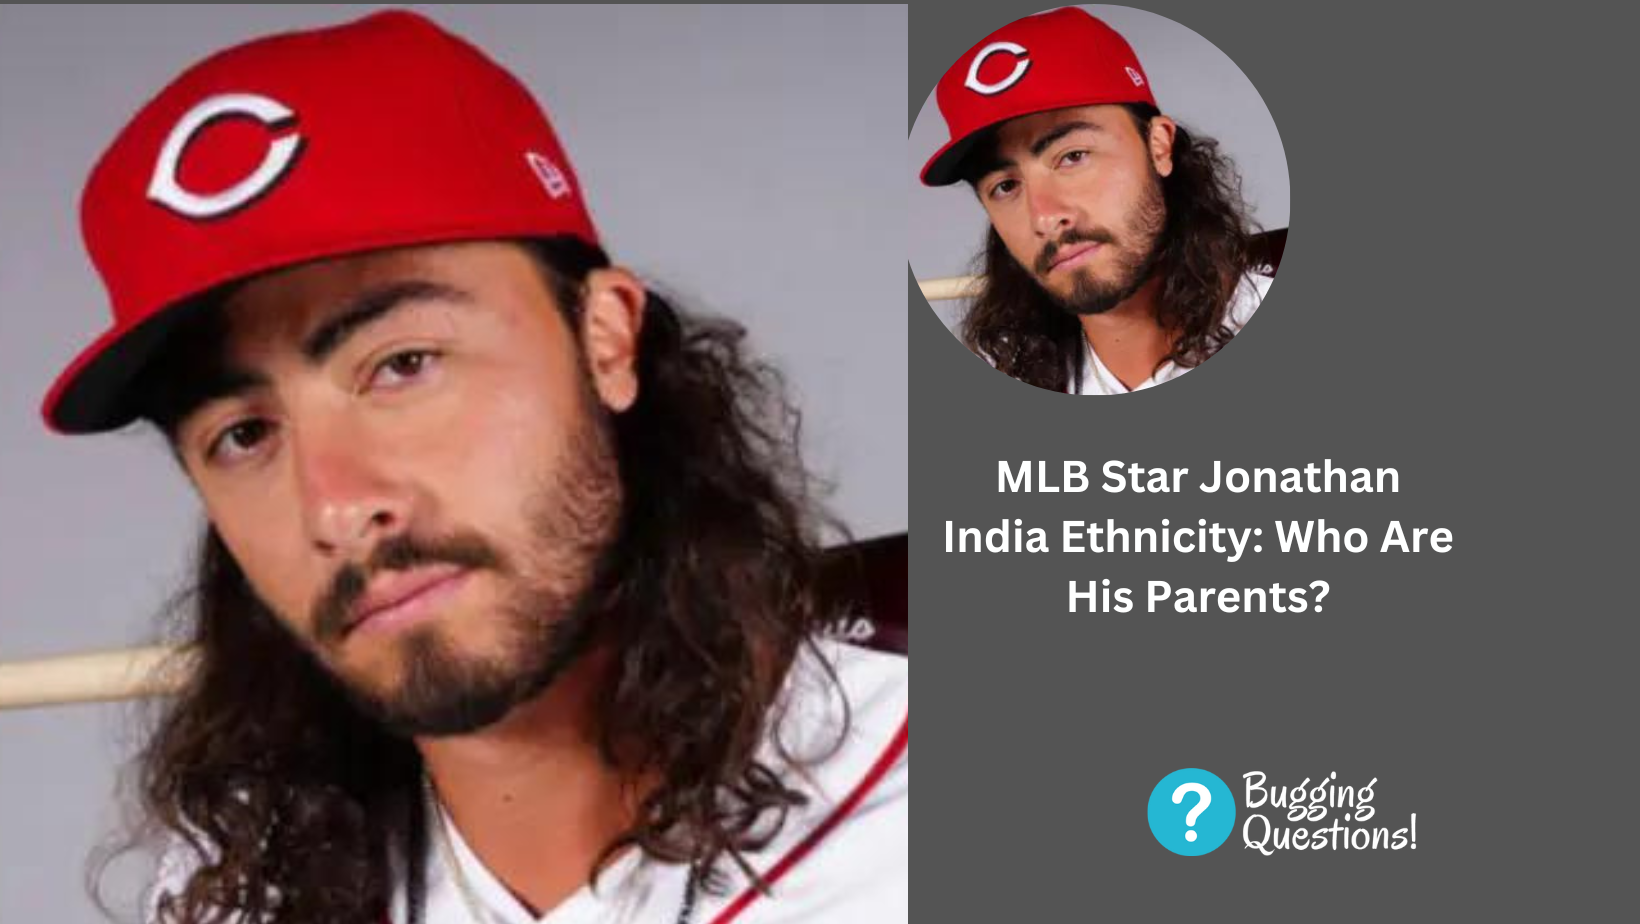 MLB Star Jonathan India Ethnicity: Who Are His Parents?